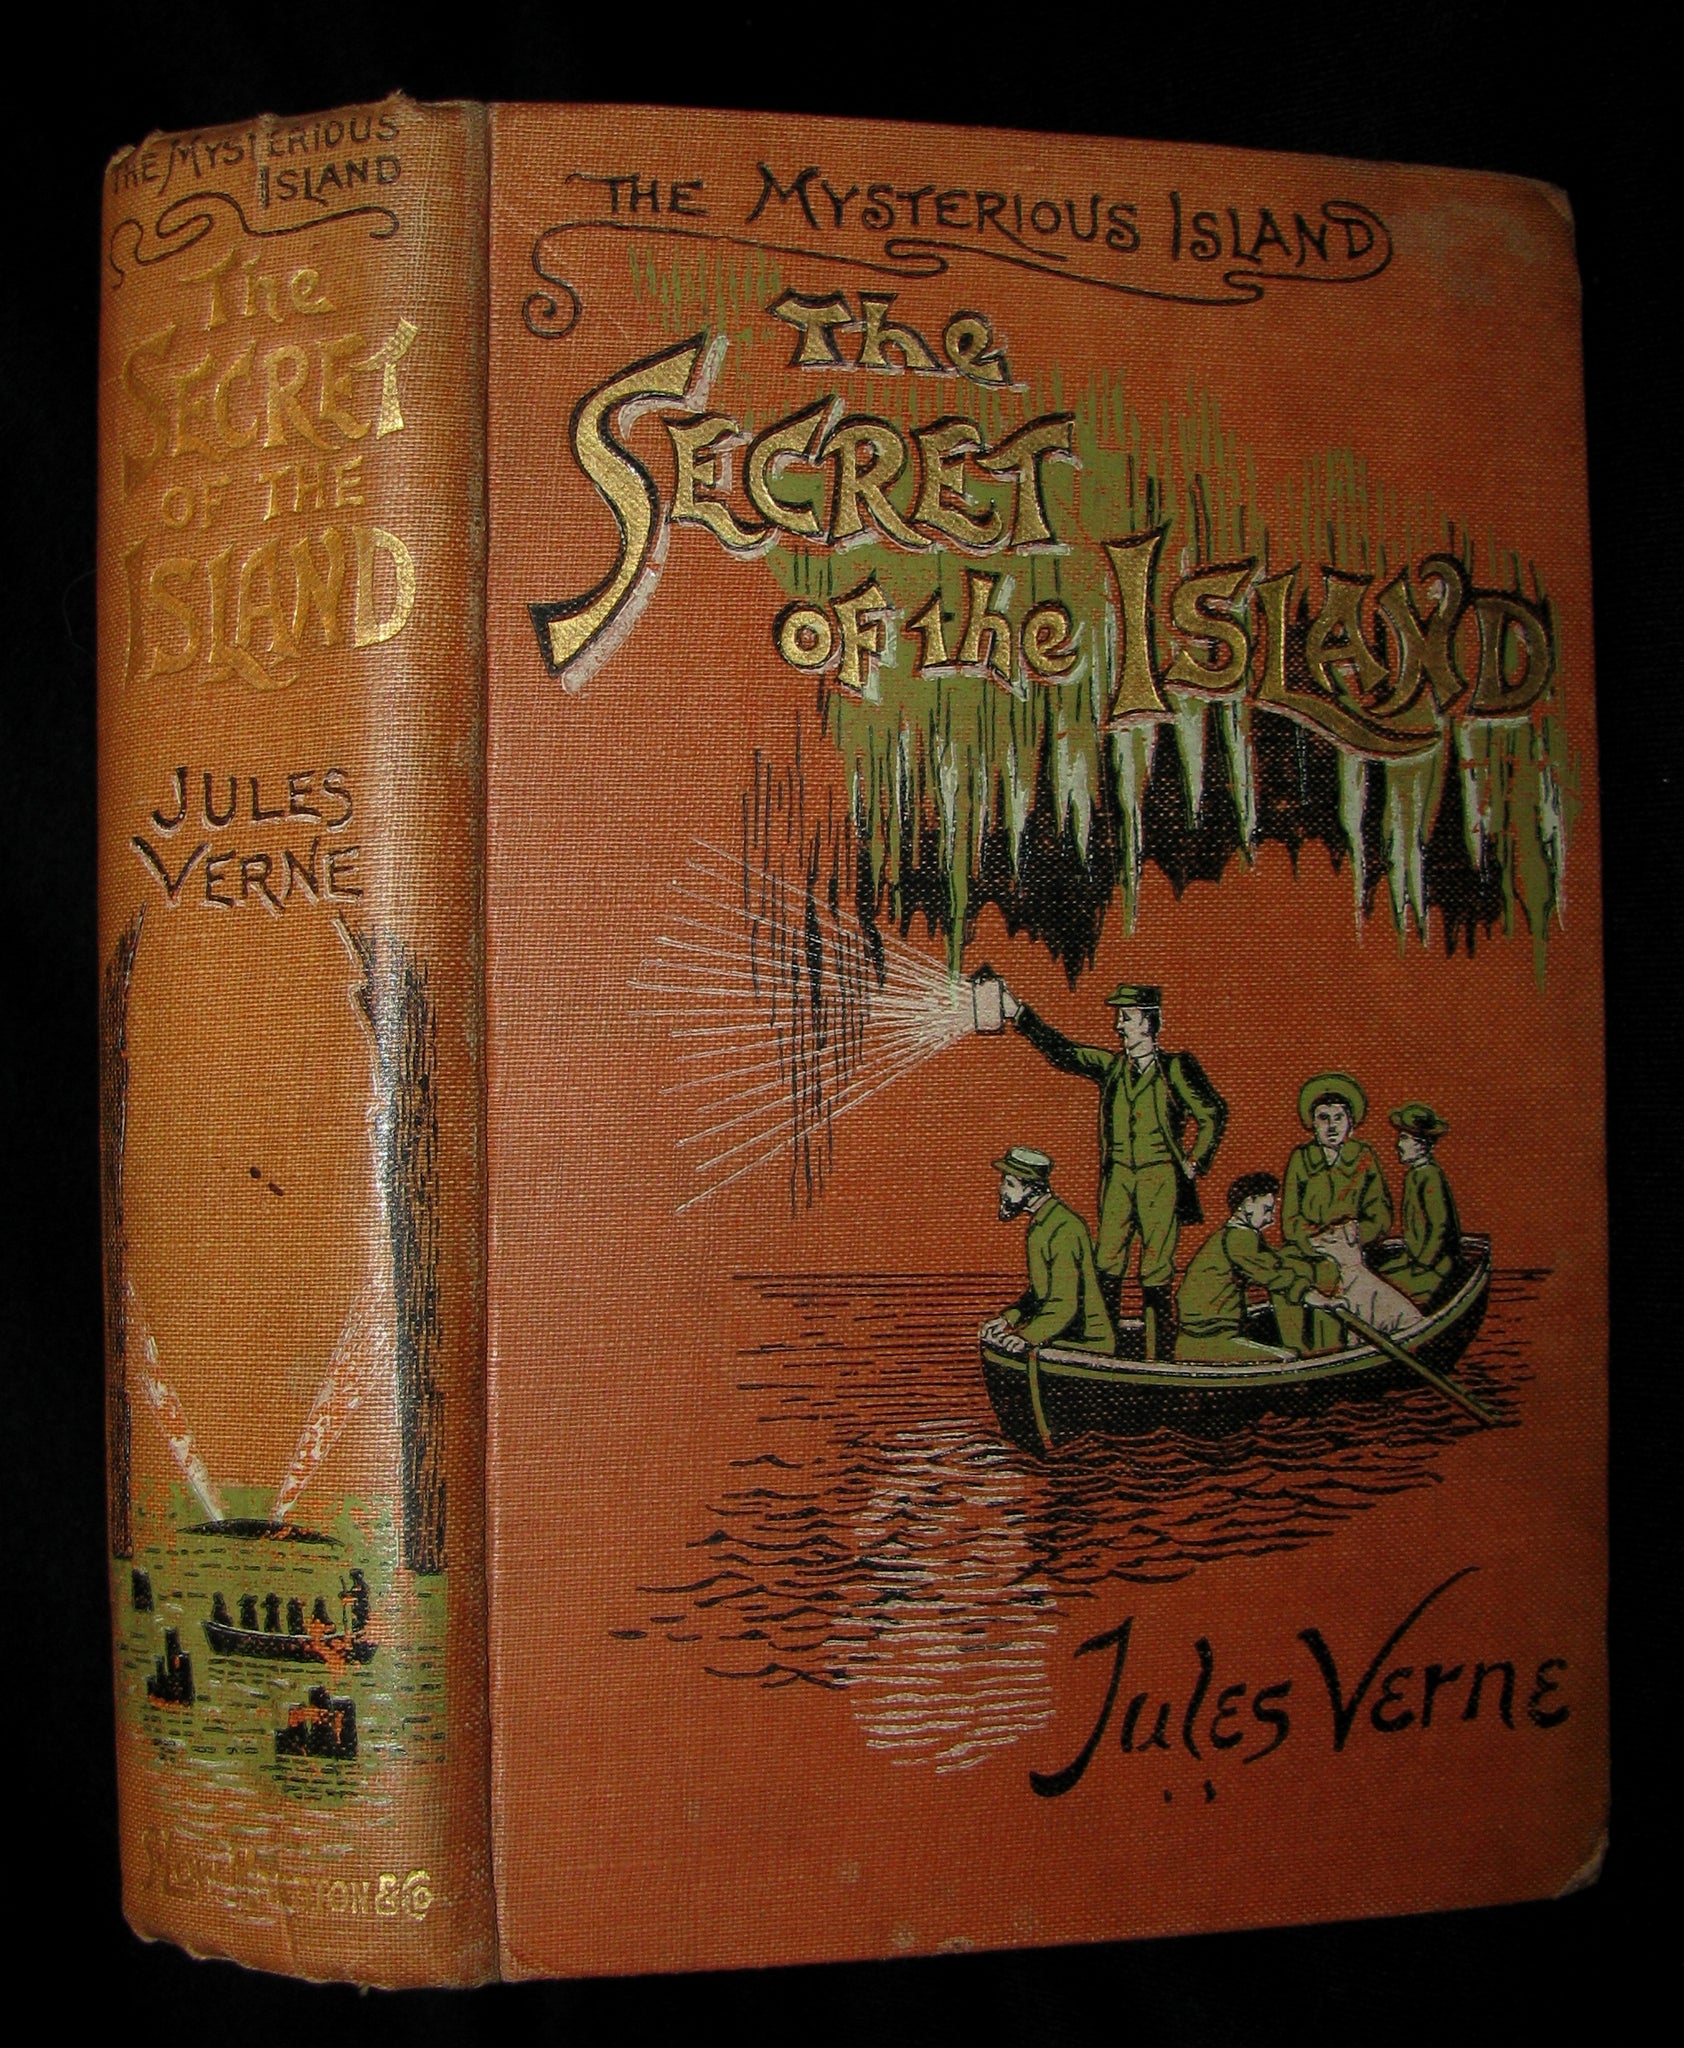 1906 Rare Illustrated Book - The Secret of the Island by Jules Verne